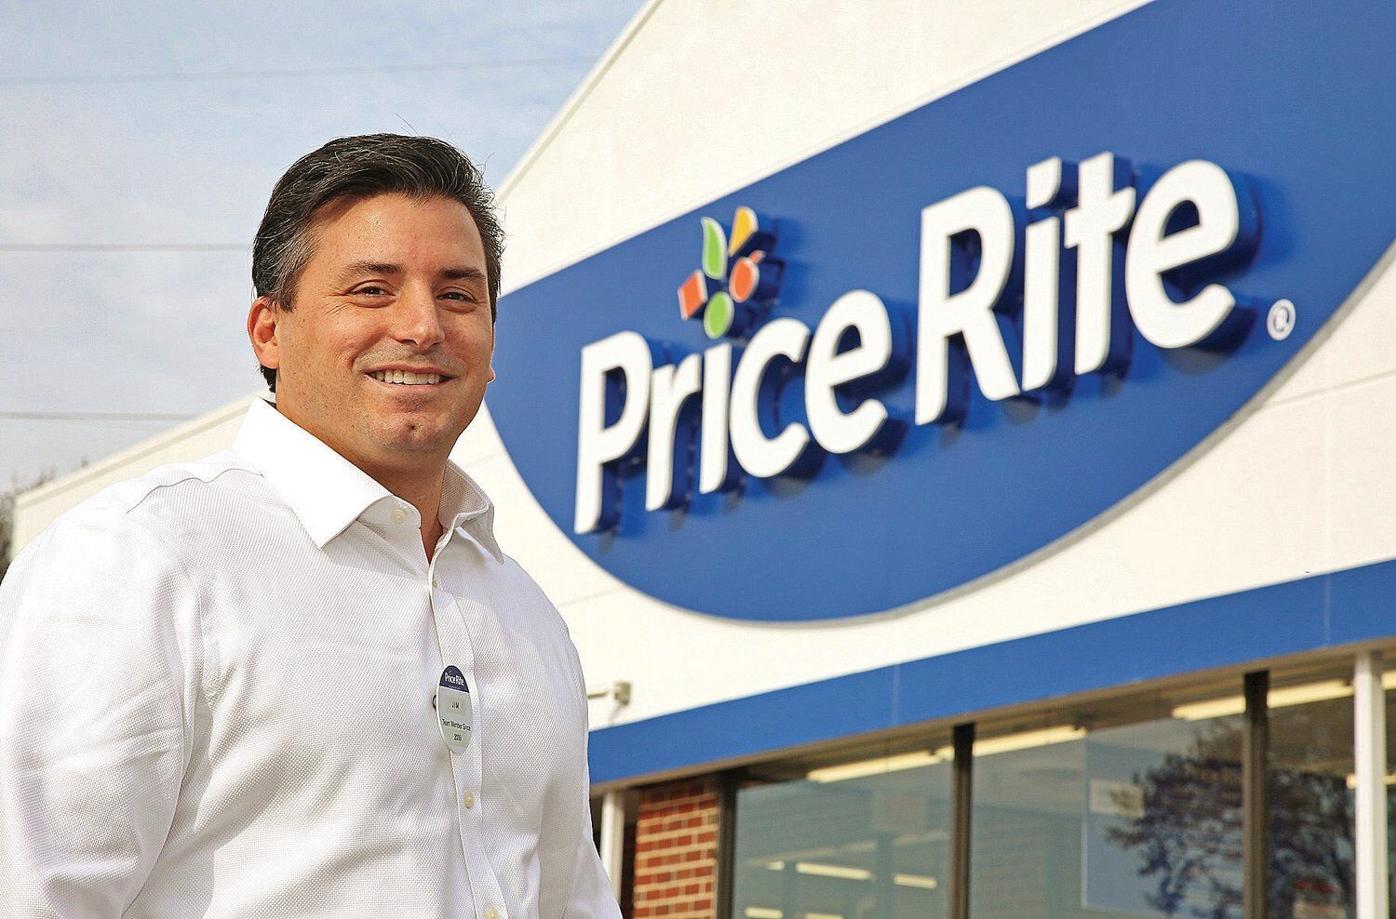 With rebranding, Price Rite Marketplace intent on 'being a one-stop shop'